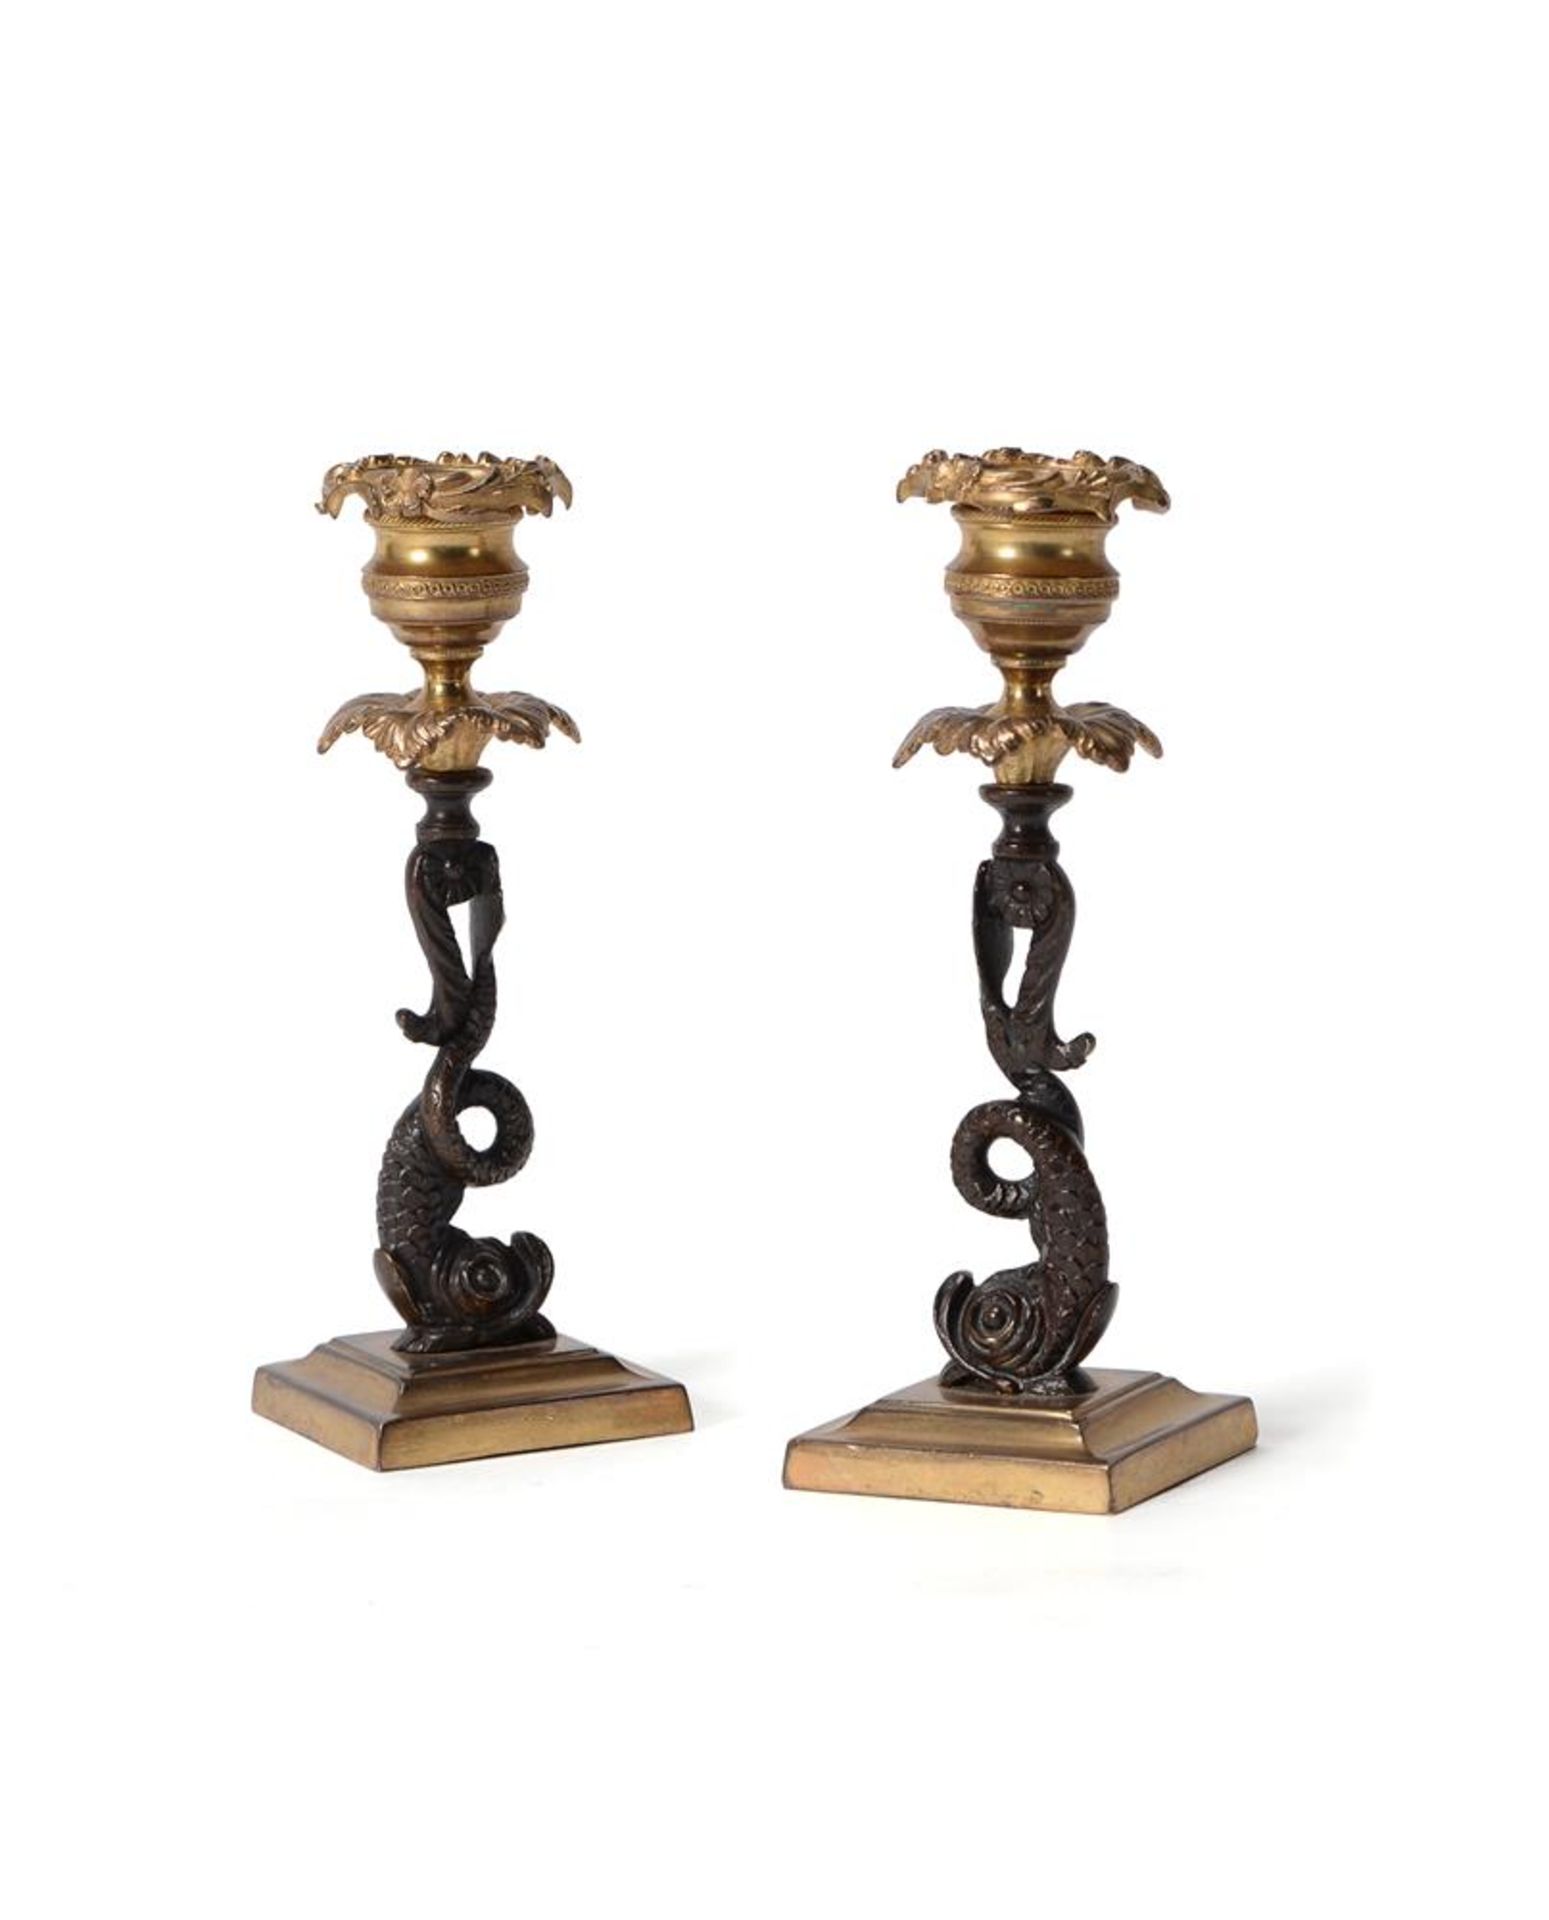 A PAIR OF REGENCY GILT AND PATINATED BRONZE CANDLESTICKS, EARLY 19TH CENTURY